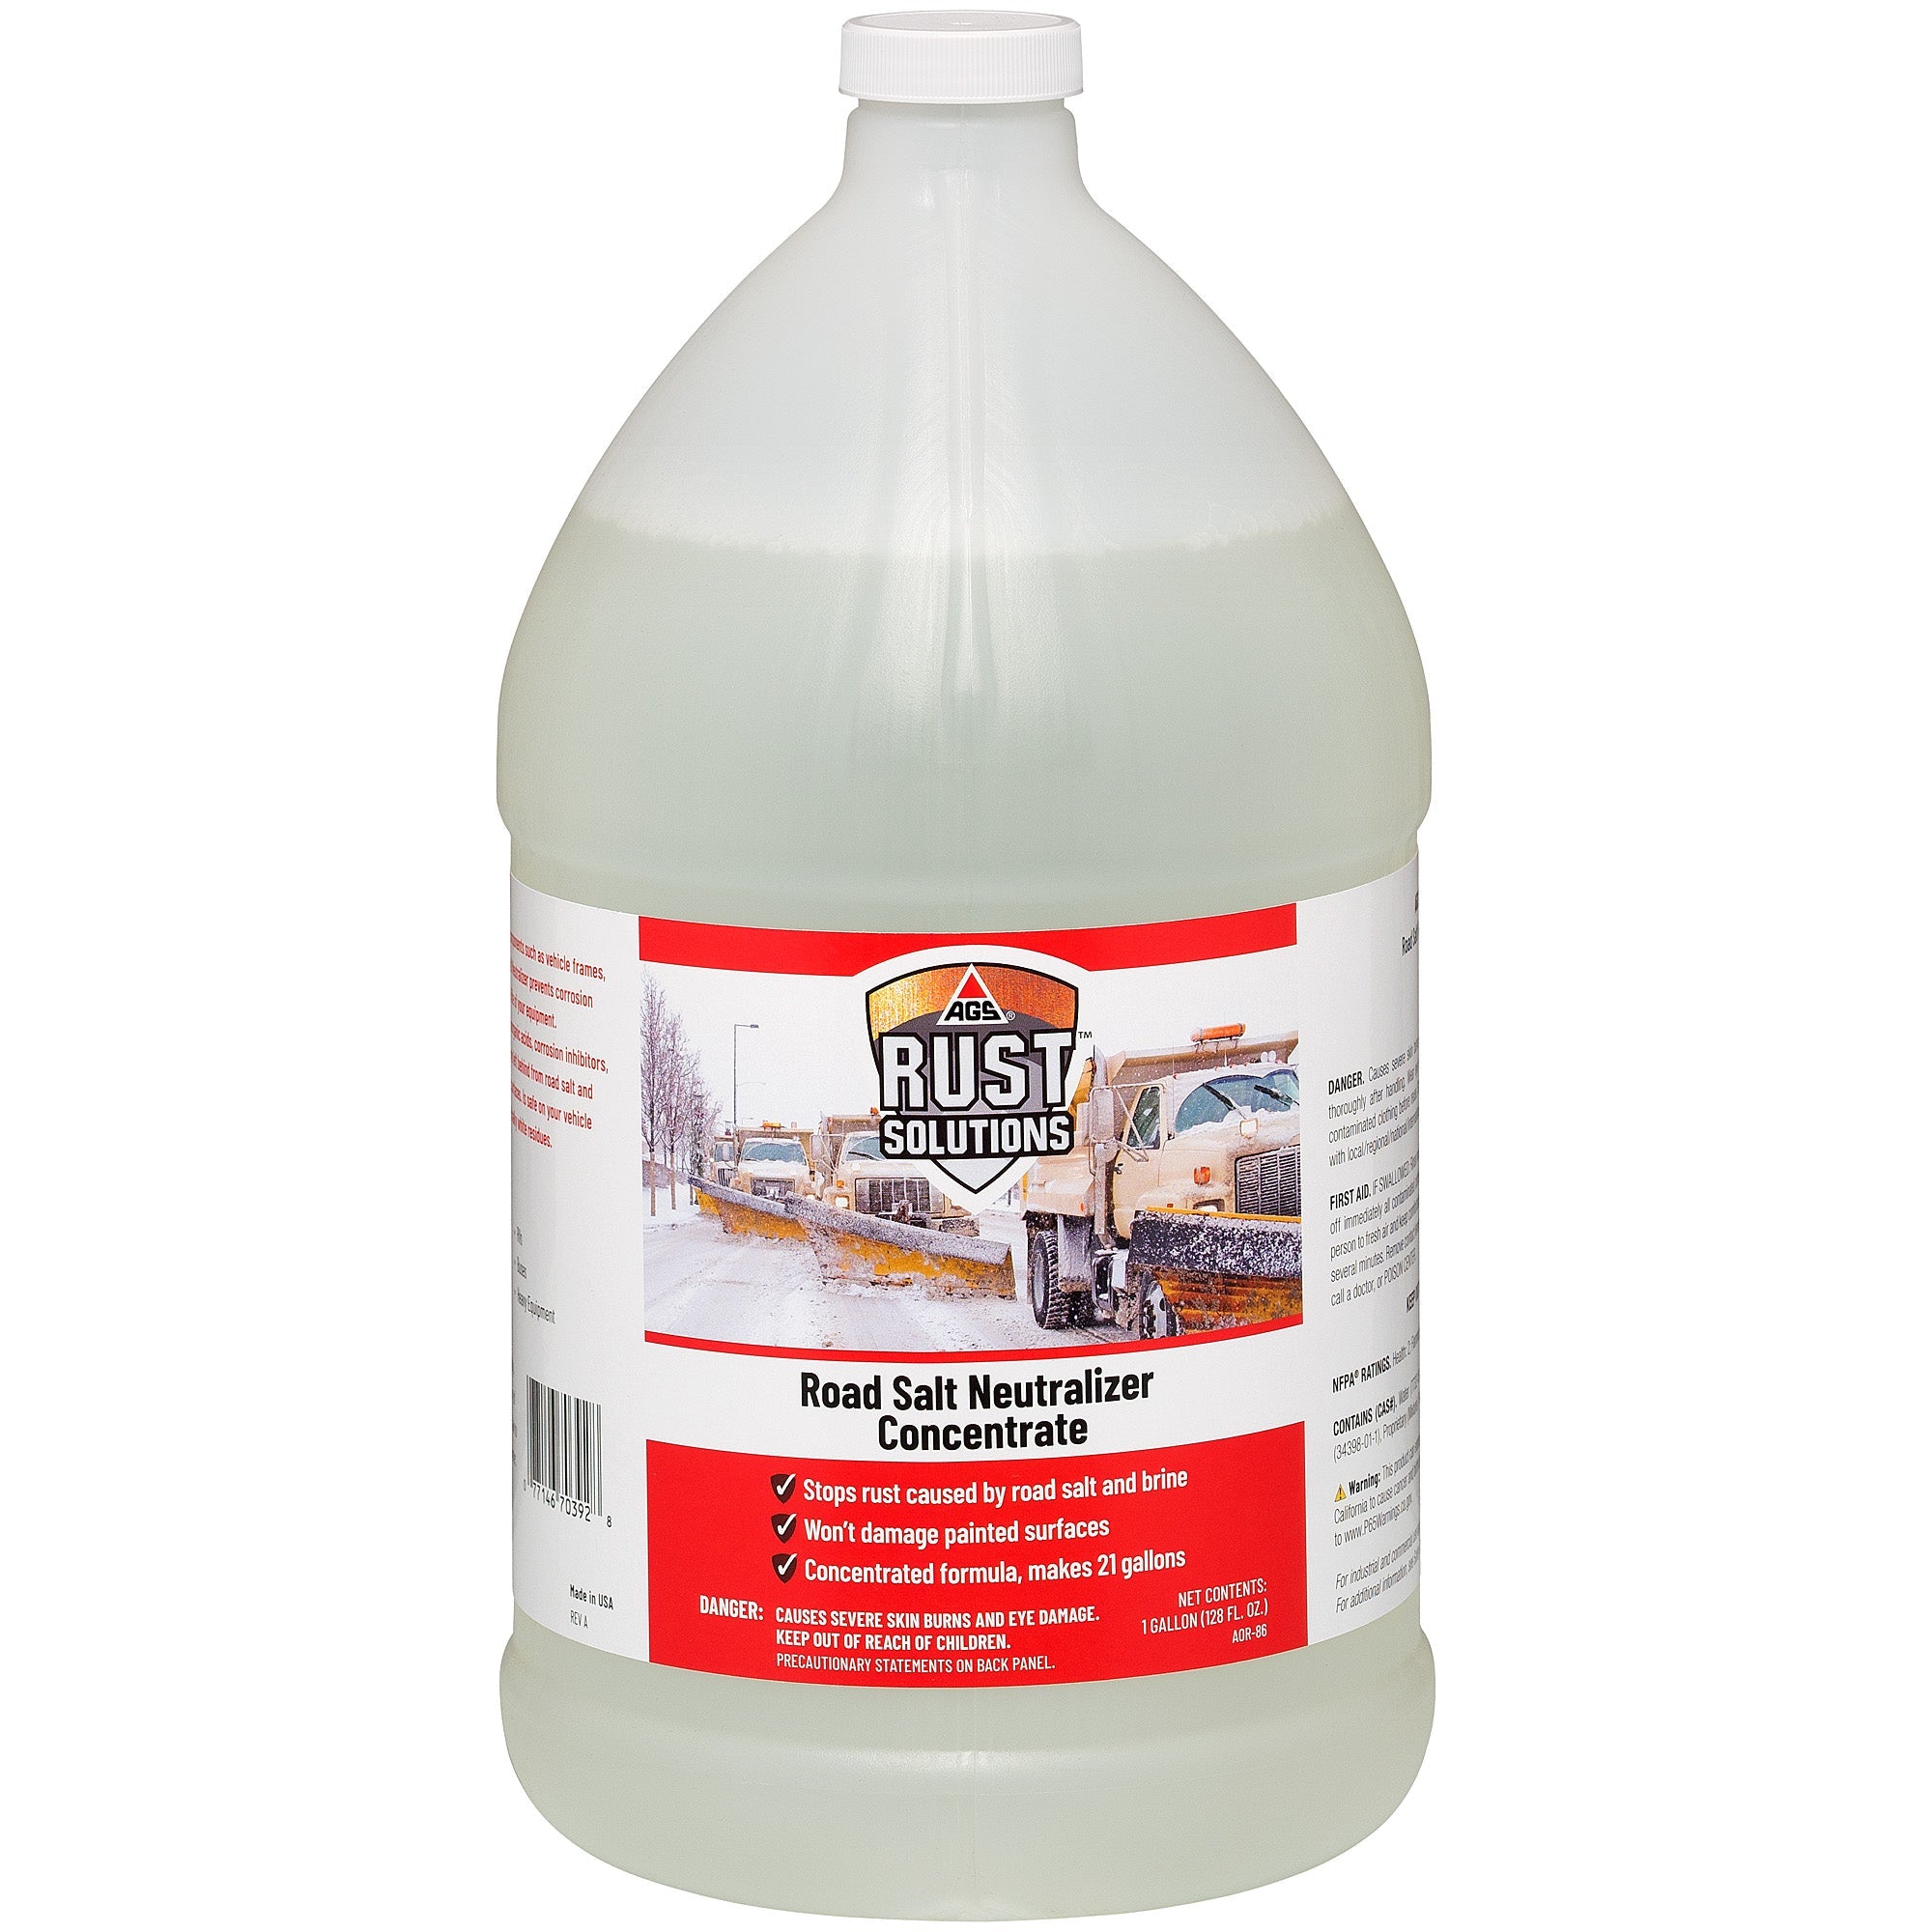 Salt Off - Salt Corrosion Removal Products for Marine & 4 x4's